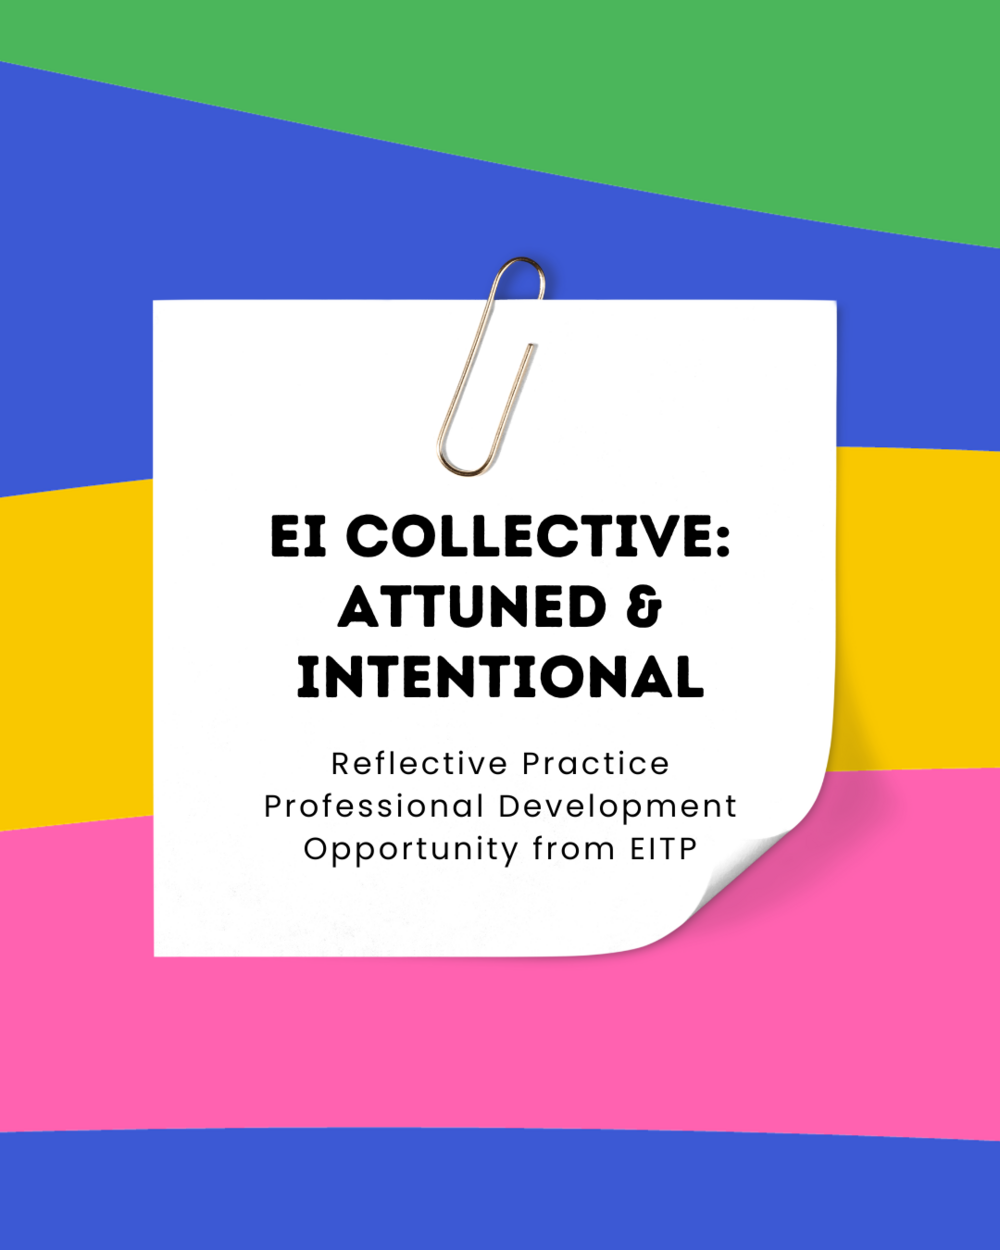 EI Collective: Attuned & Intentional - reflective practice group opportunity from EITP